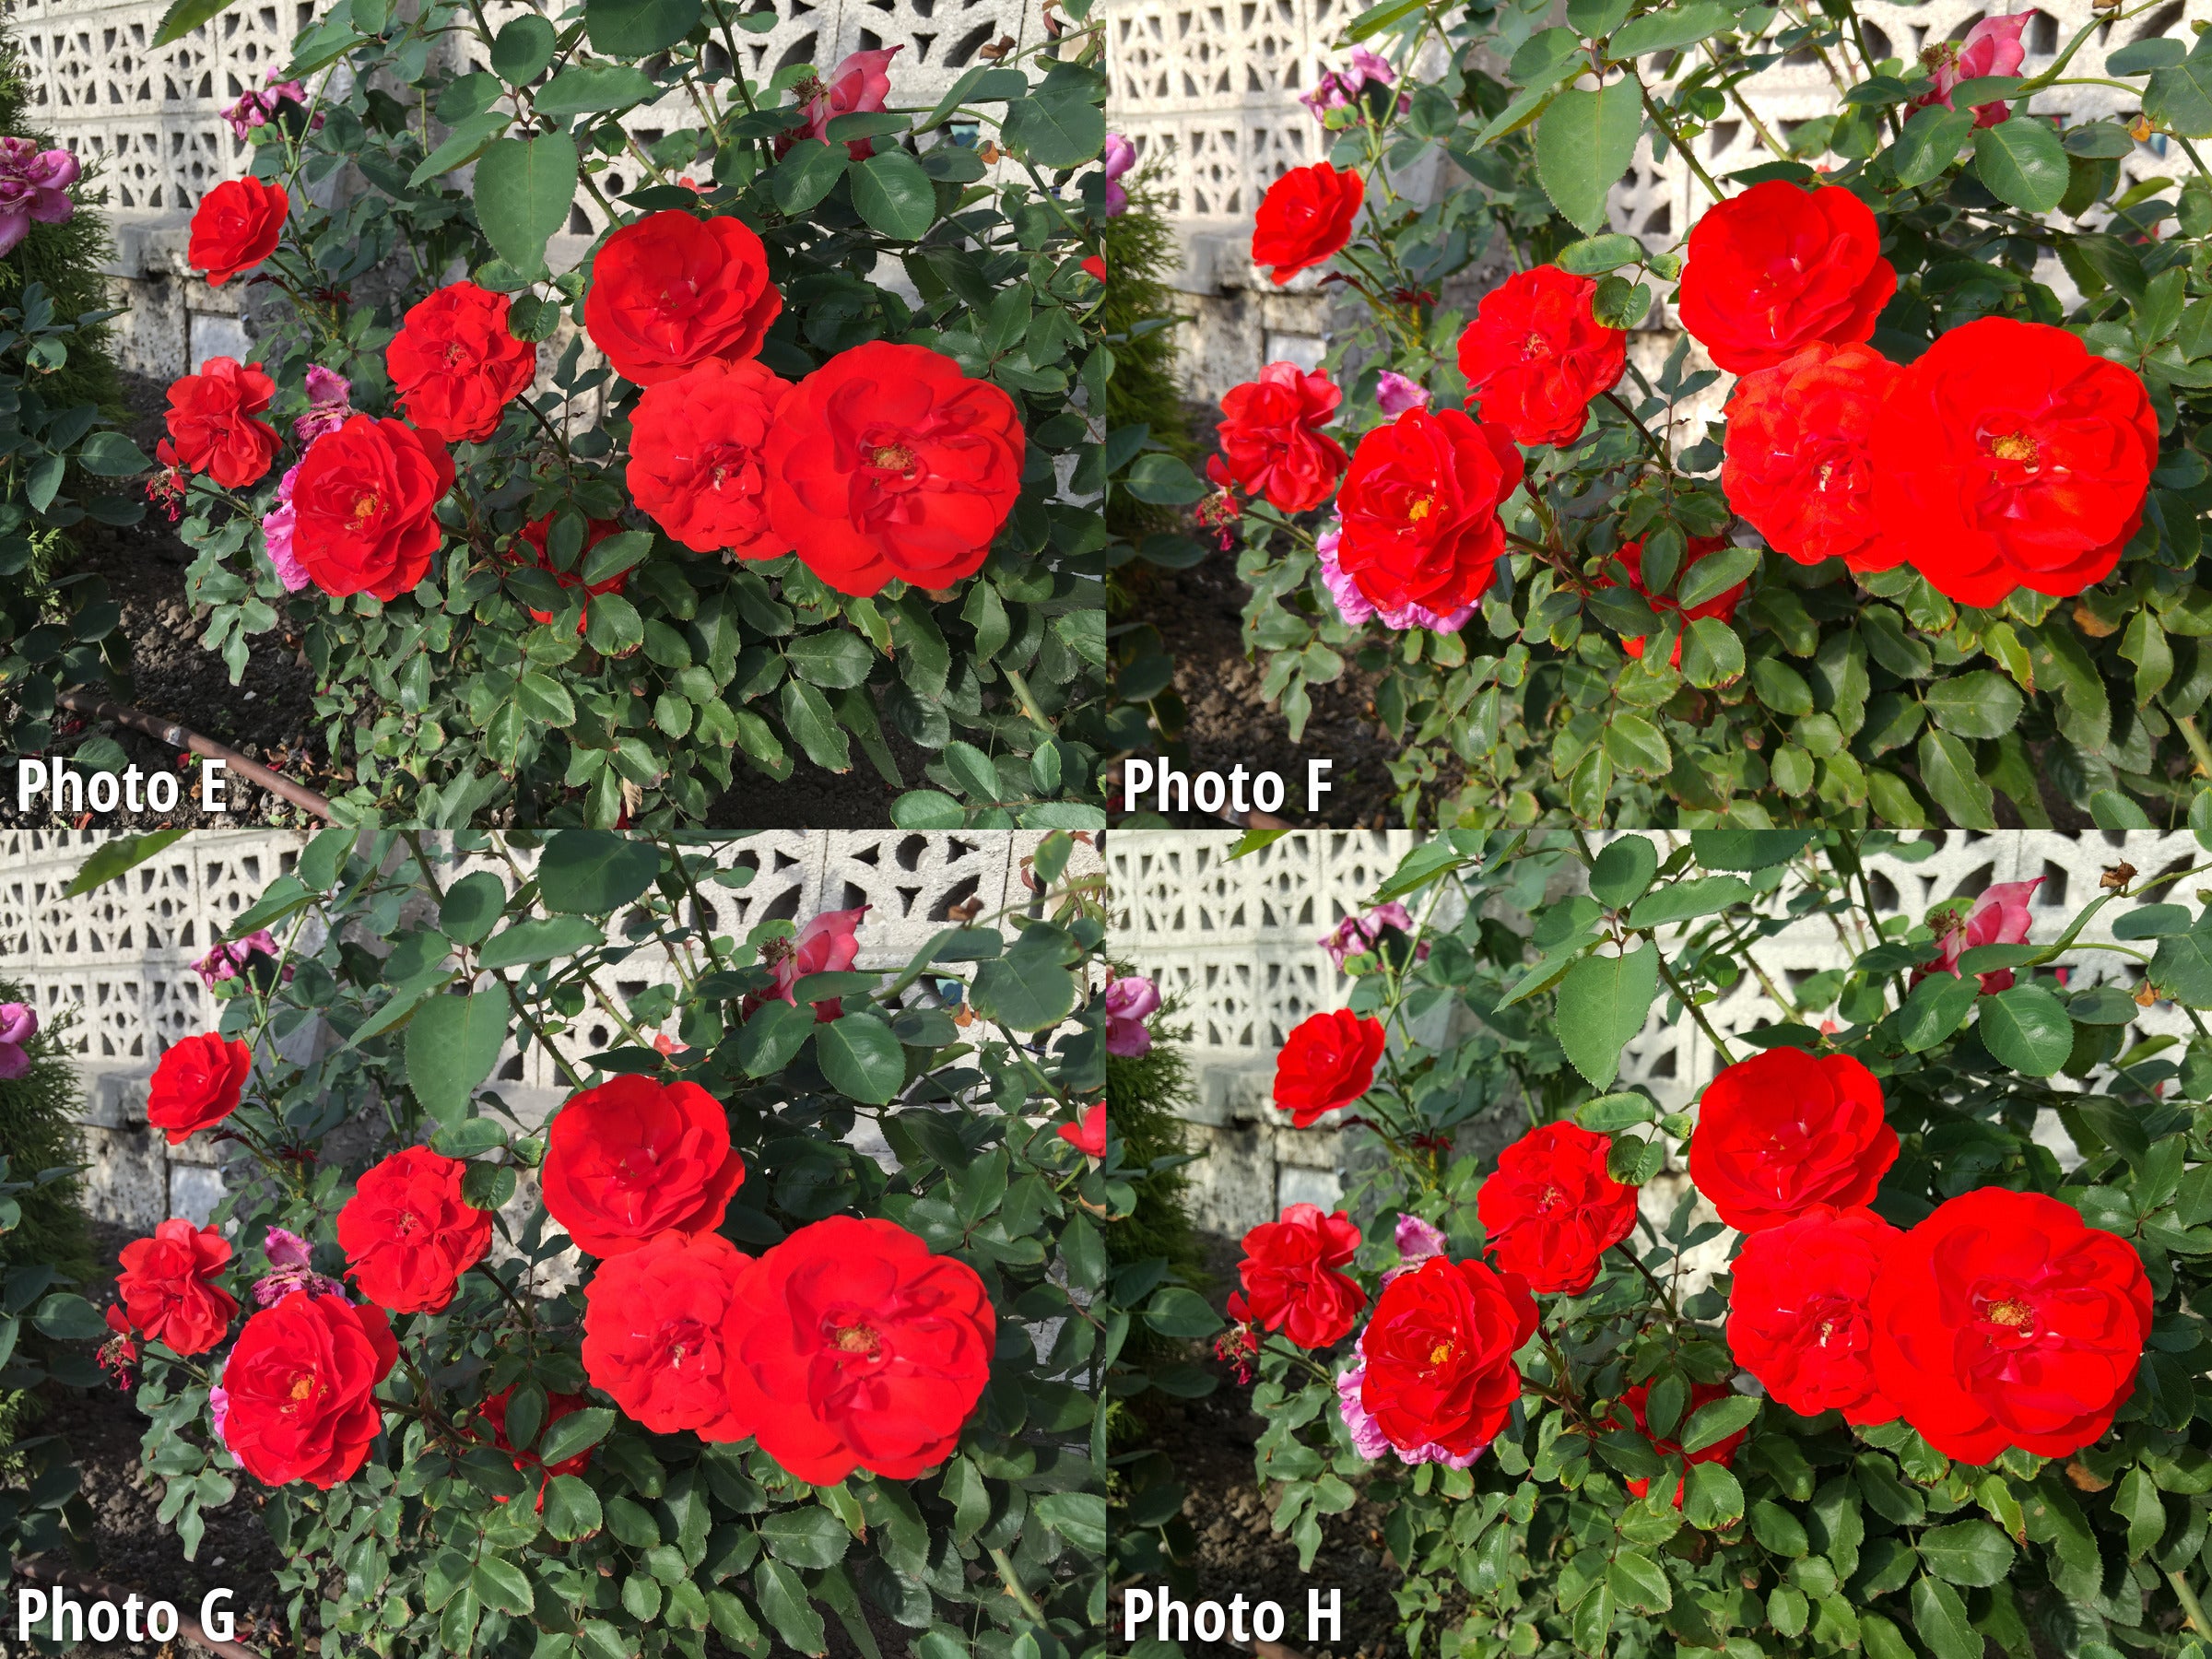 Side-by-side comparison. Click to zoom in - iPhone 6s vs Galaxy S6, LG G4, iPhone 6 blind camera comparison: vote for the best phone